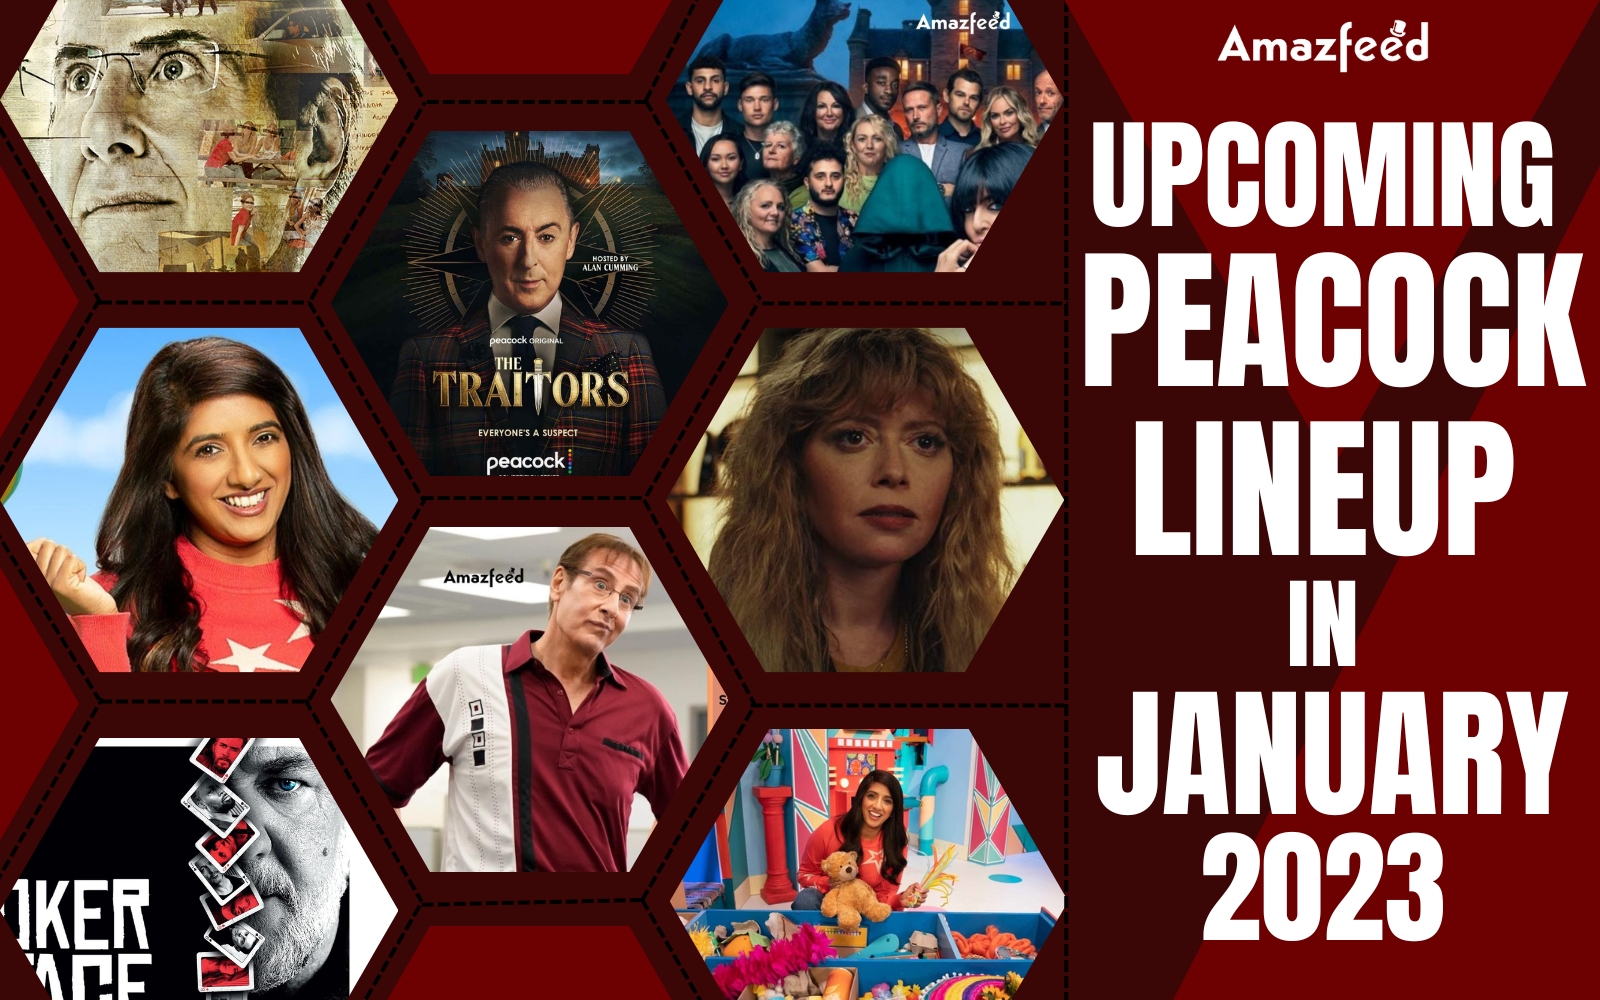 Peacock Movie and Series Lineup in January 2023 » Amazfeed